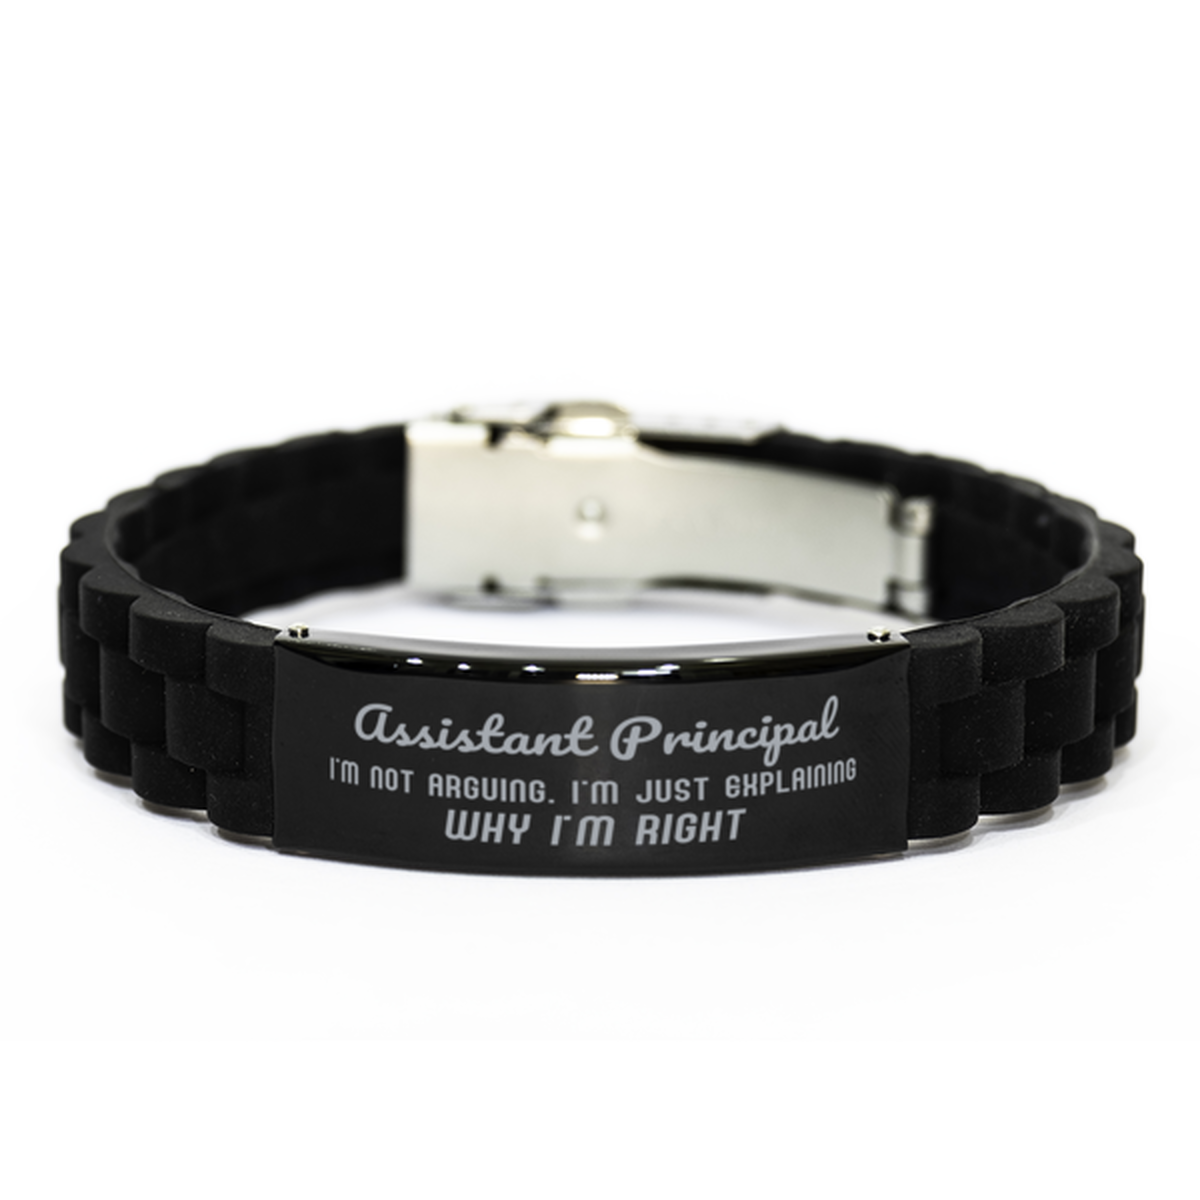 Assistant Principal I'm not Arguing. I'm Just Explaining Why I'm RIGHT Black Glidelock Clasp Bracelet, Funny Saying Quote Assistant Principal Gifts For Assistant Principal Graduation Birthday Christmas Gifts for Men Women Coworker